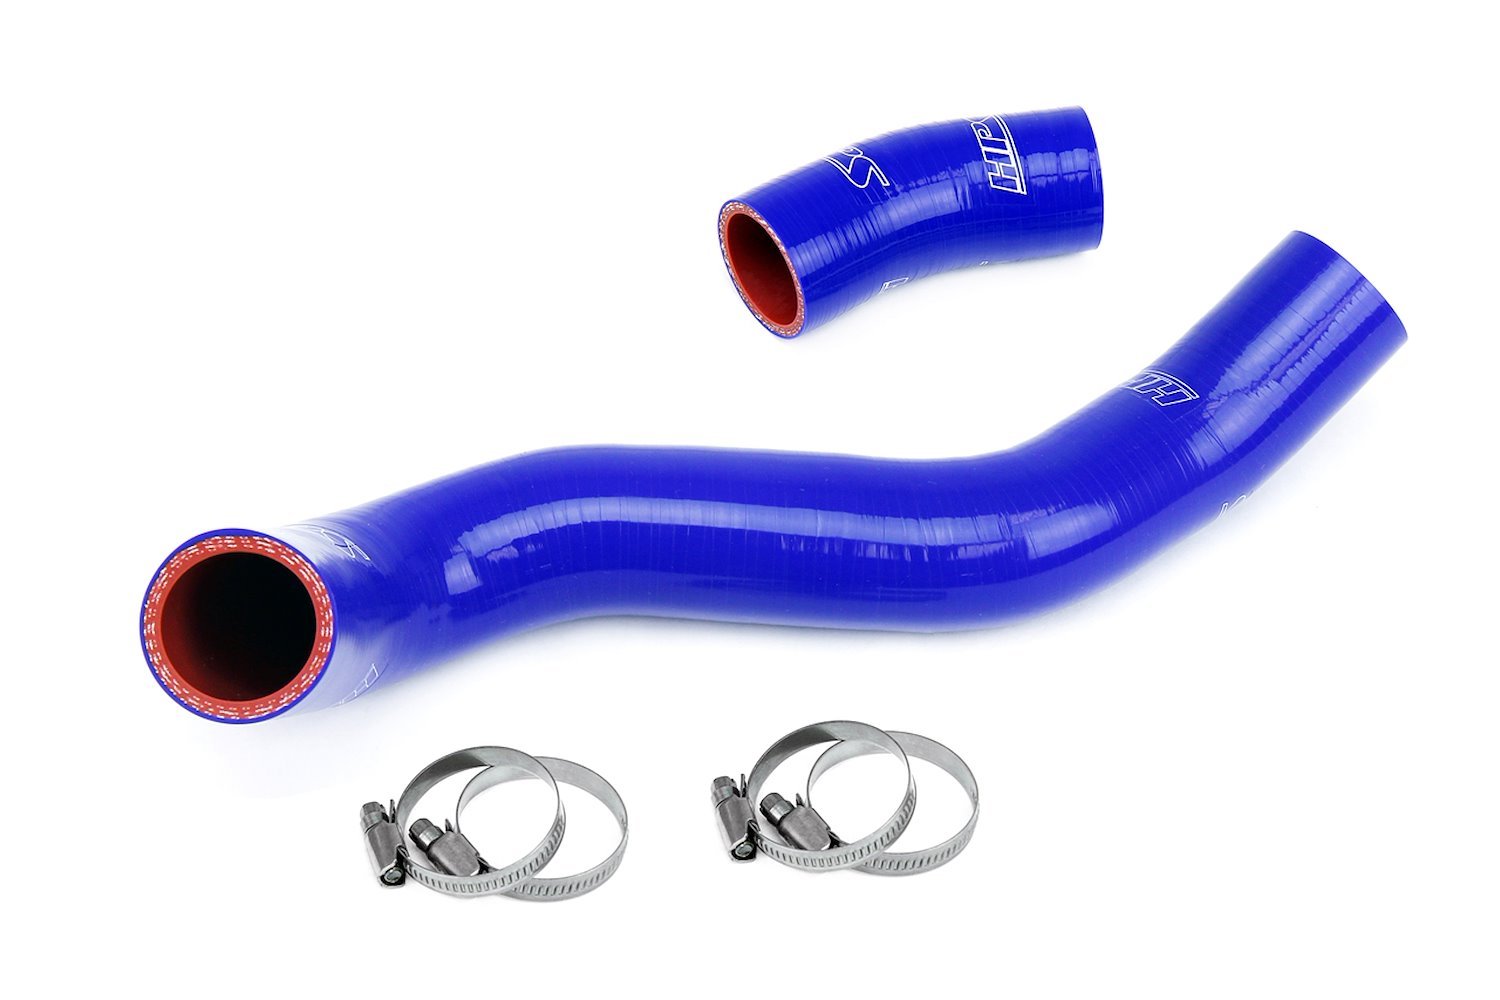 57-2063-BLUE Radiator Hose Kit, 3-Ply Reinforced Silicone, Replaces Lower Rubber Radiator Hose